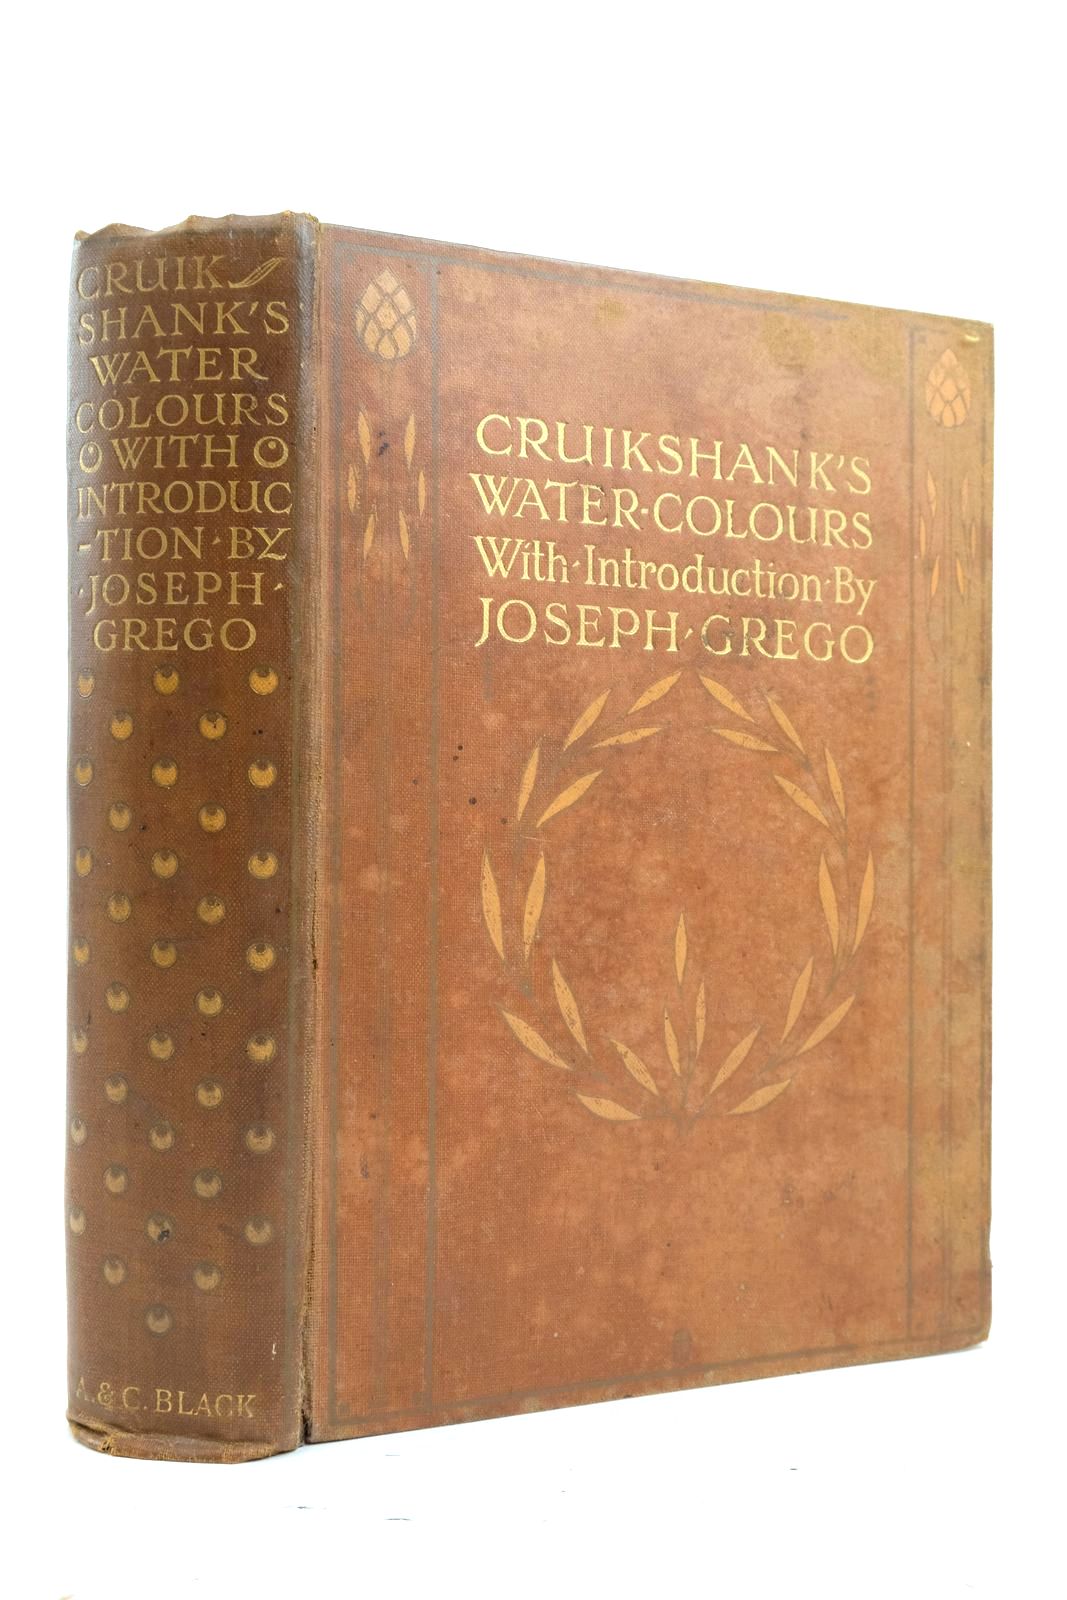 Photo of CRUIKSHANK'S WATER COLOURS written by Grego, Joseph
Dickens, Charles
Ainsworth, William Harrison
Maxwell, W.H. illustrated by Cruikshank, George published by A. & C. Black (STOCK CODE: 2137011)  for sale by Stella & Rose's Books